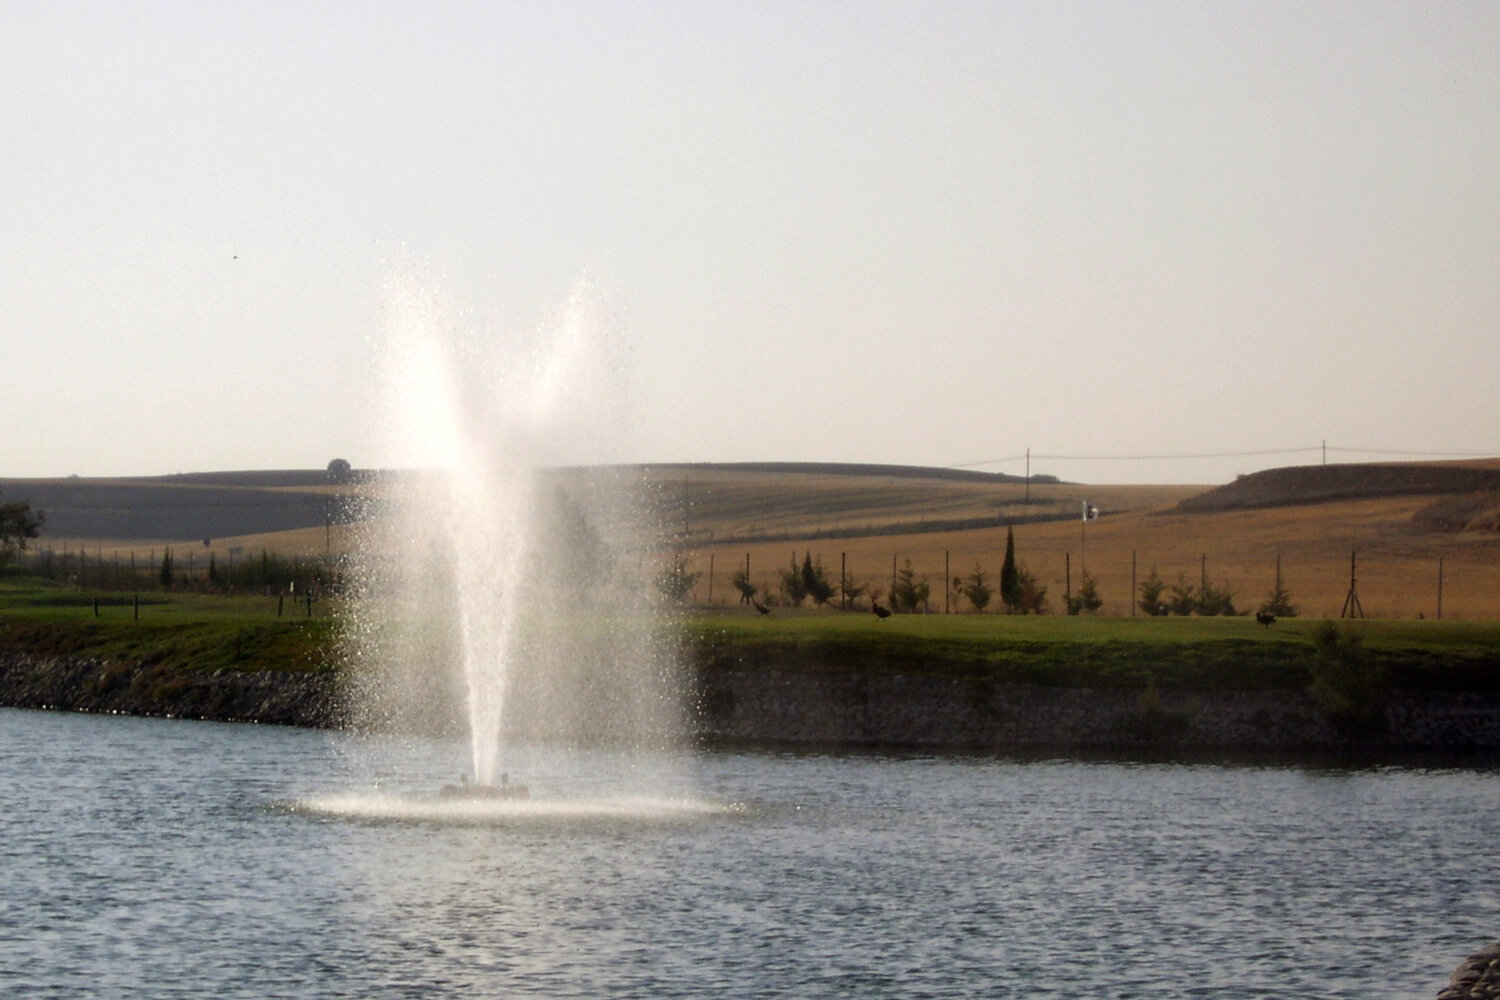 One of Otterbine's Rocket Aerating Geyser Fountains